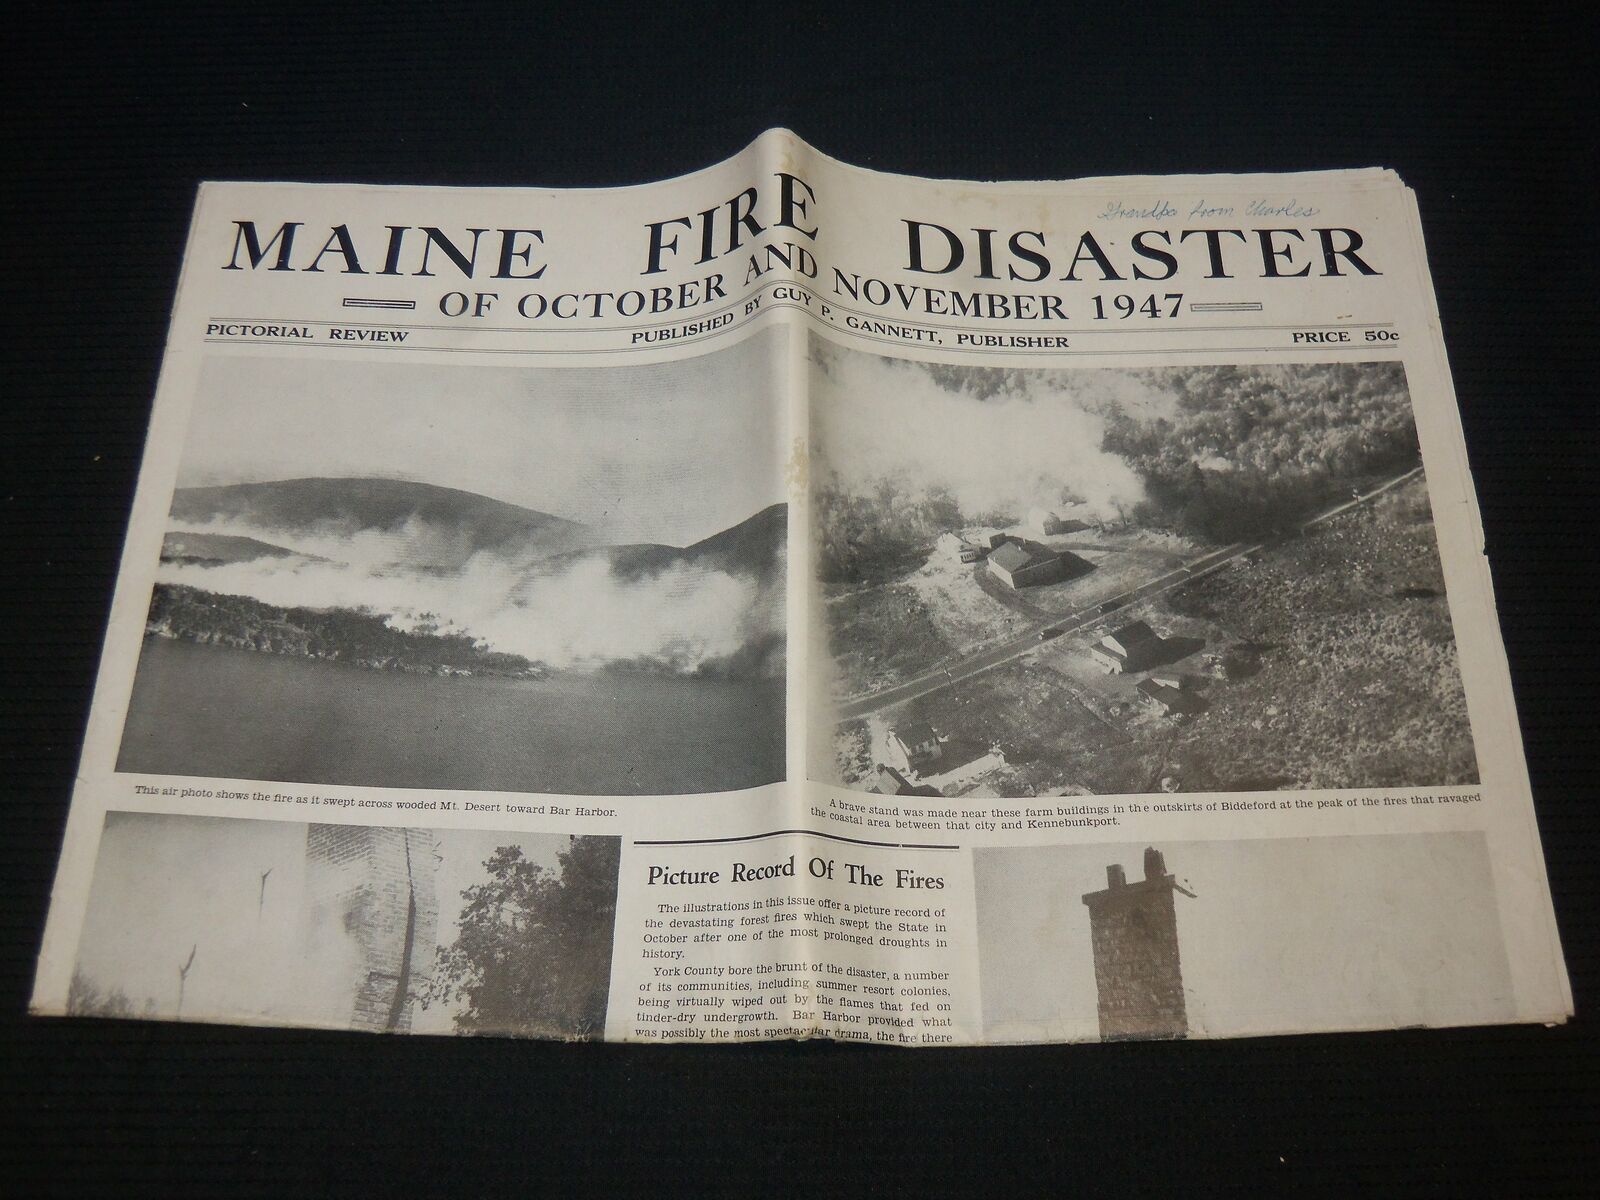 1947 MAINE FIRE DISASTER PICTORIAL REVIEW - GREAT PHOTOS - NP 4251Z